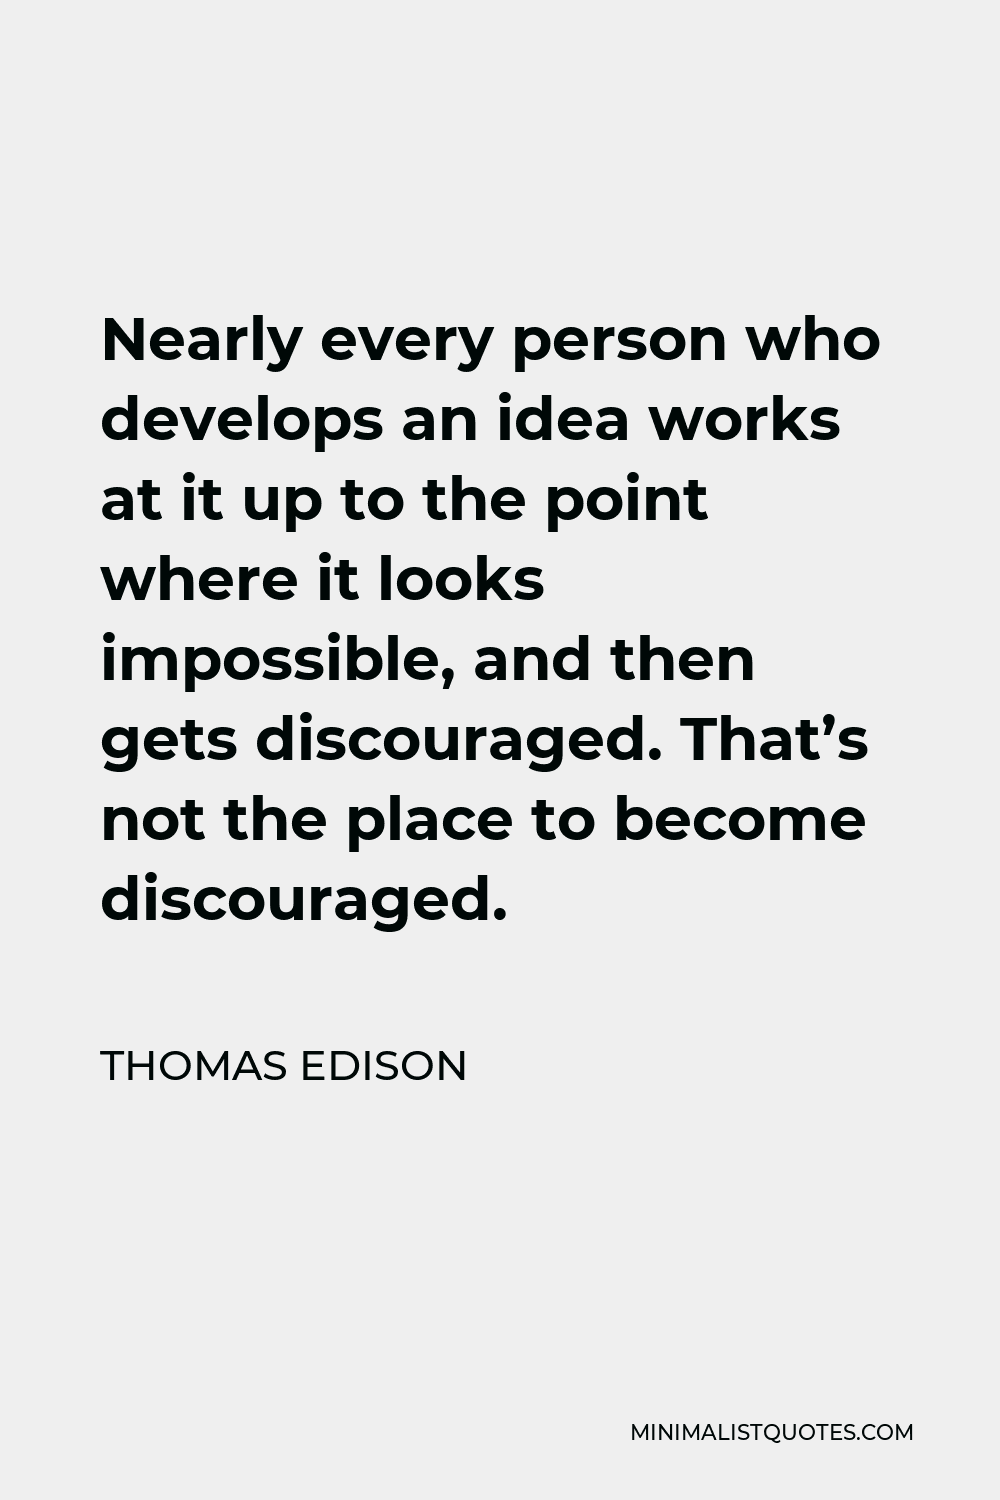 Thomas Edison Quote - Nearly every person who develops an idea works at it up to the point where it looks impossible, and then gets discouraged. That’s not the place to become discouraged.